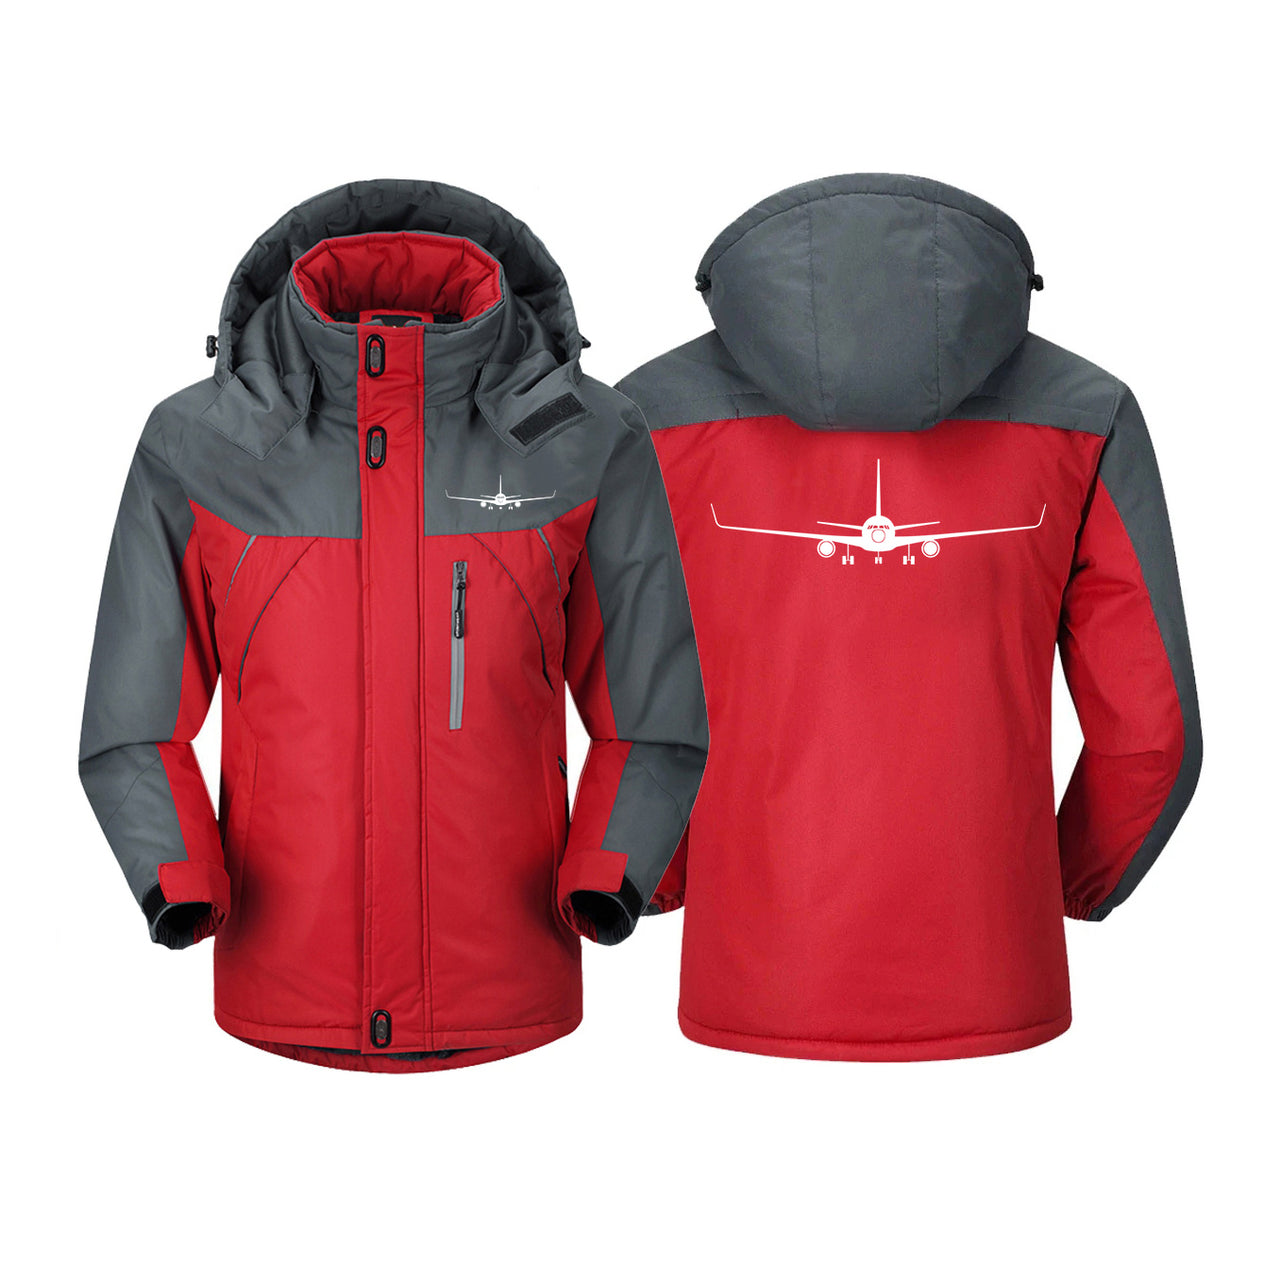 Boeing 767 Silhouette Designed Thick Winter Jackets